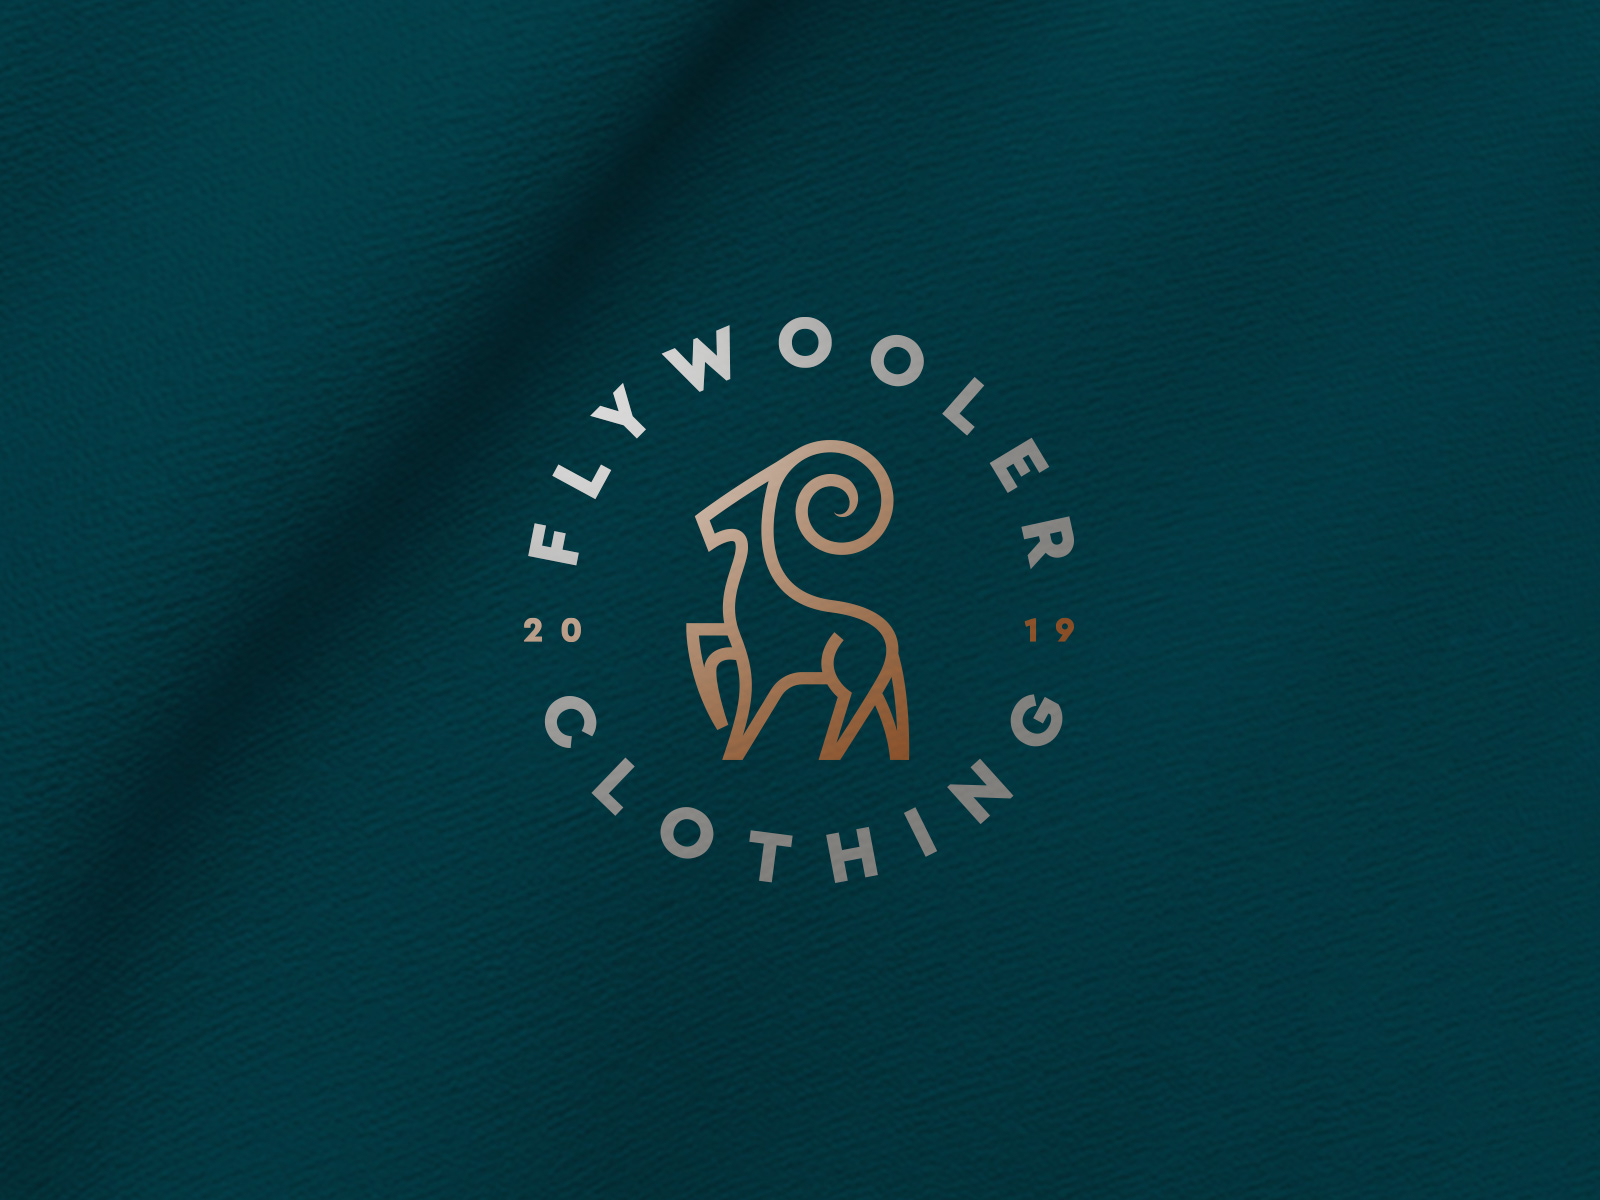 Flywooler clothing by Ahmed creatives on Dribbble